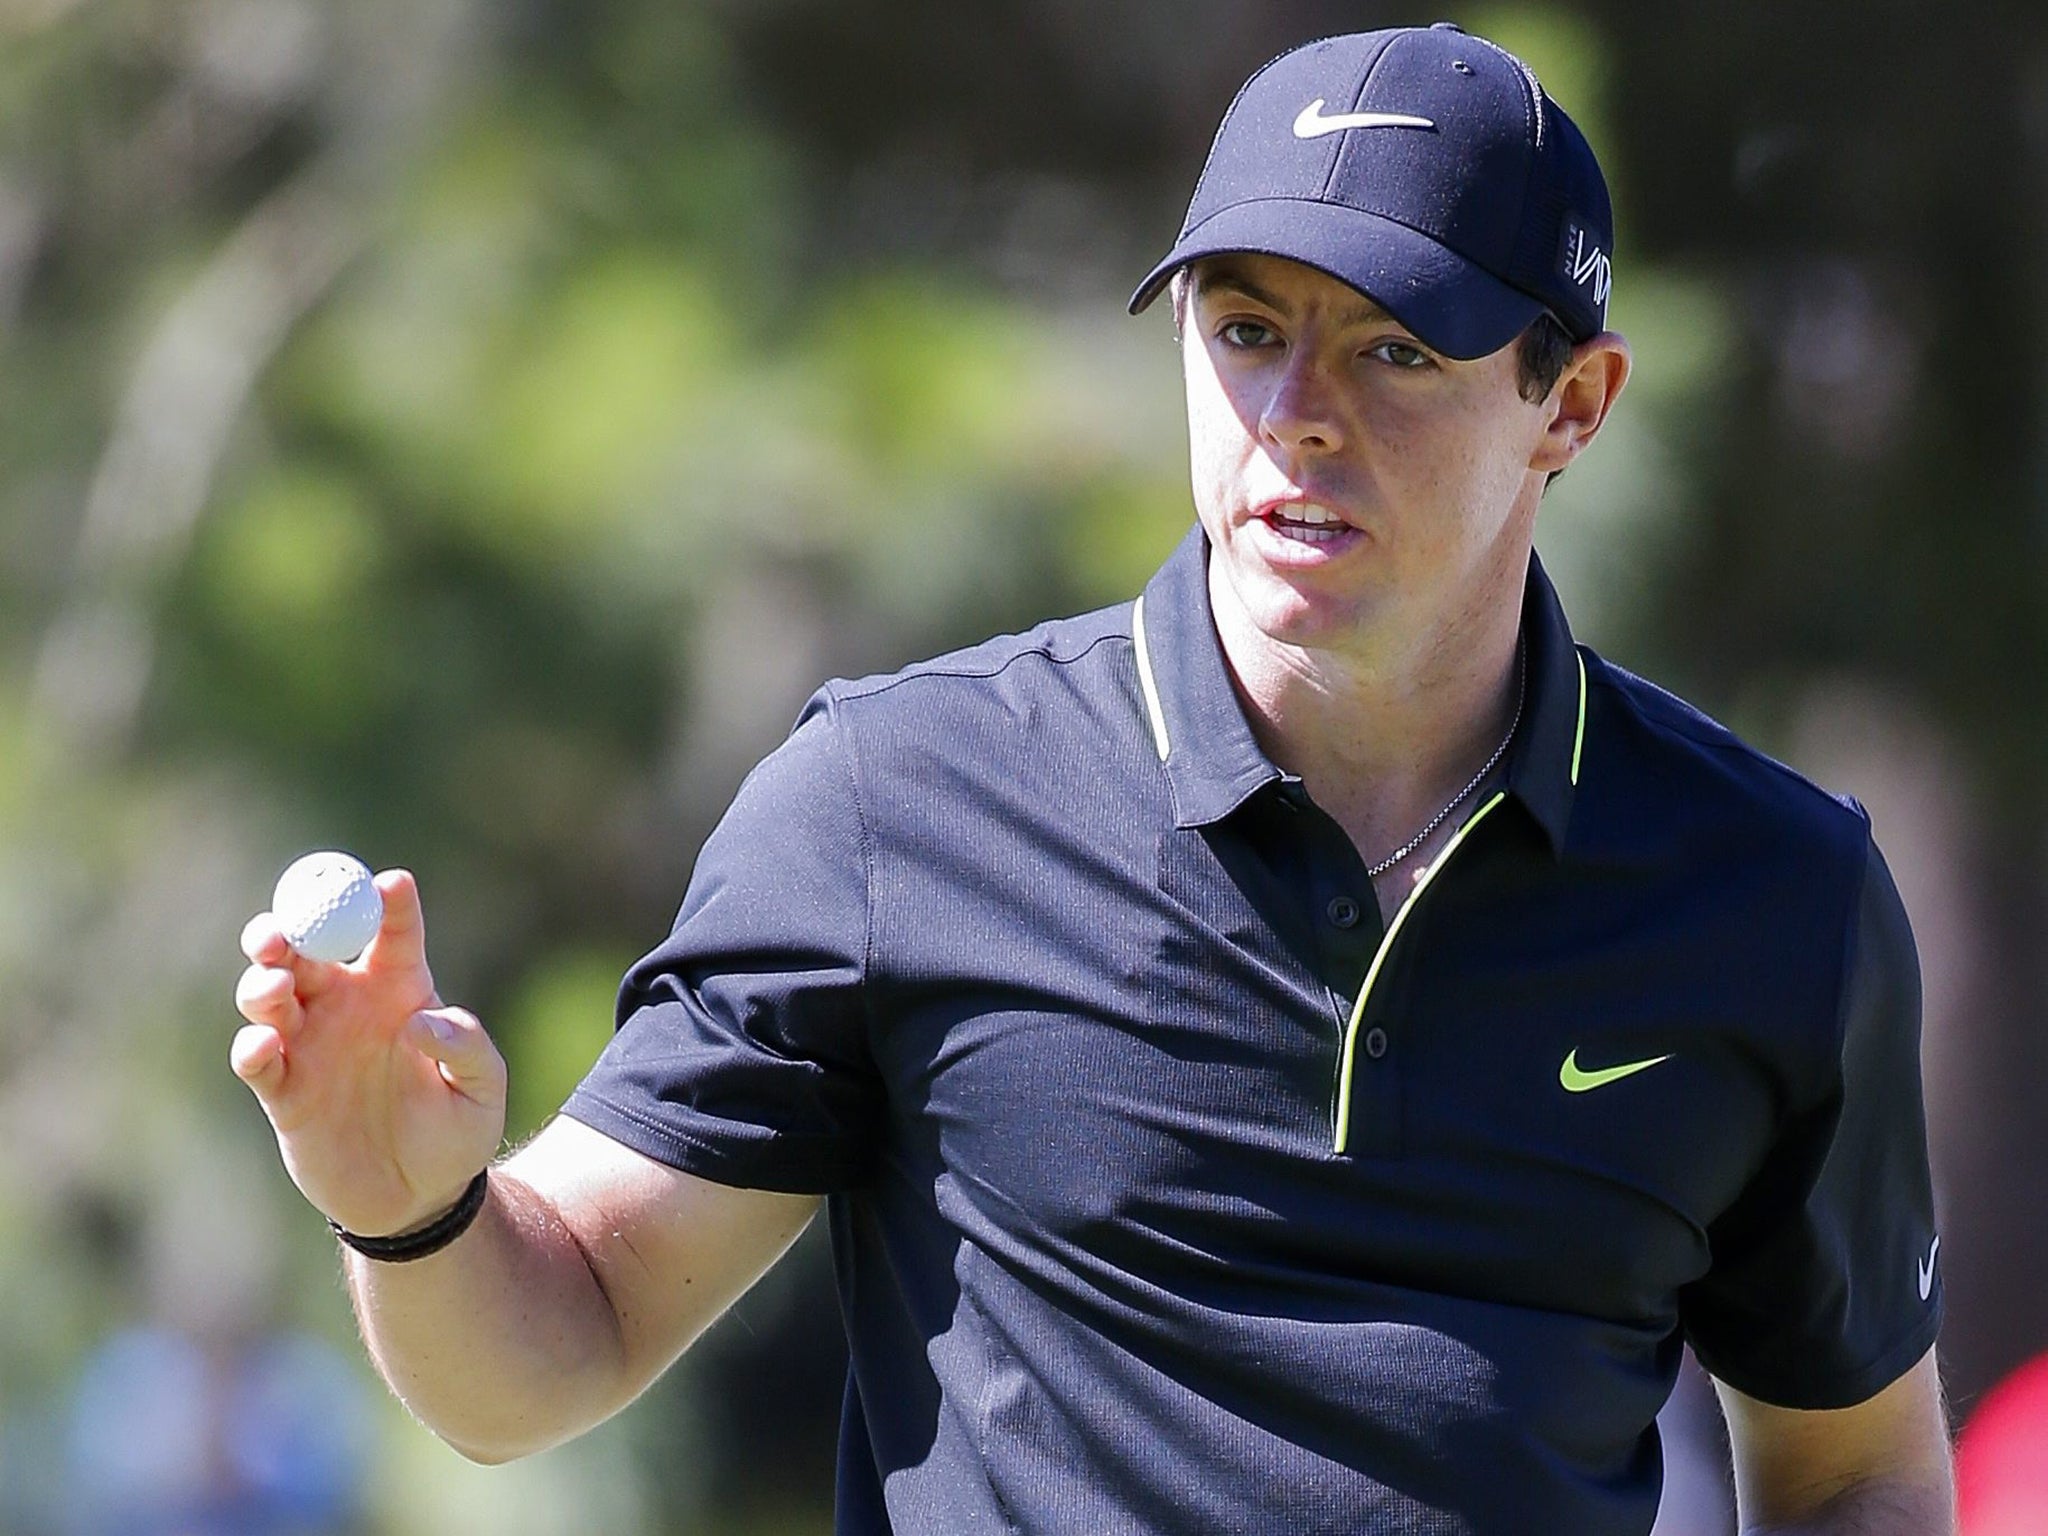 Rory McIlroy celebrates making a putt on the 15th